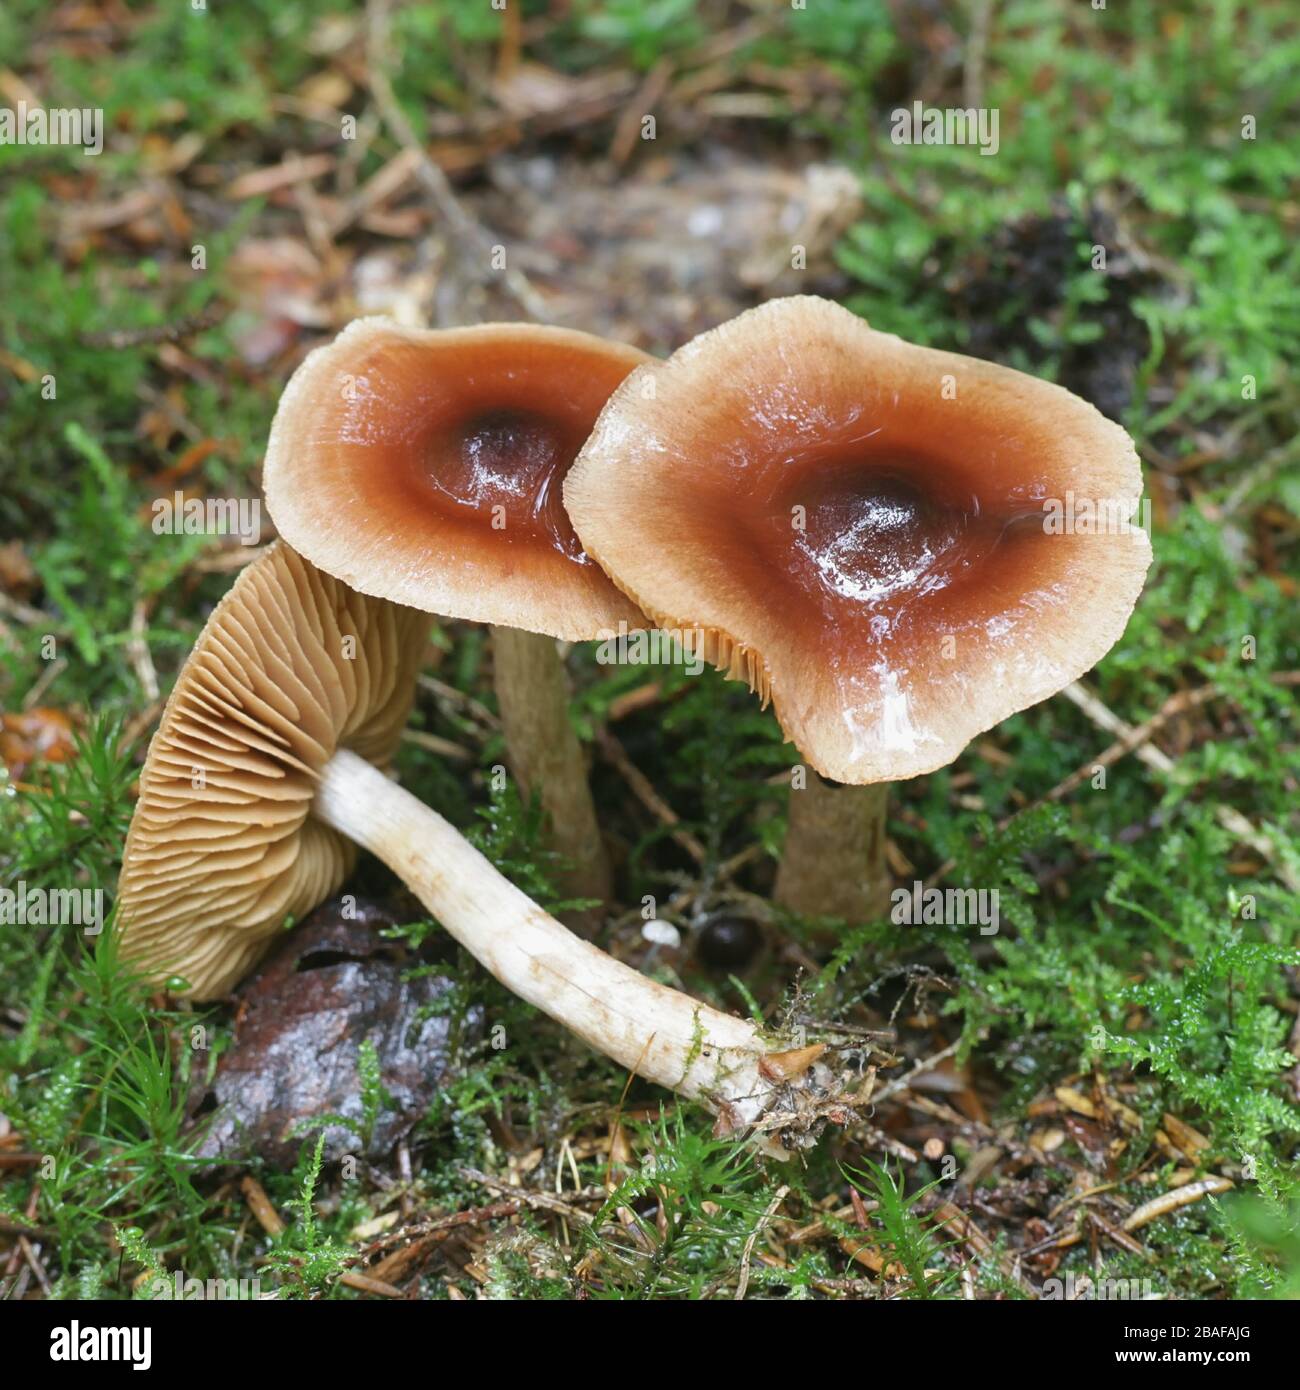 Hebeloma mesophaeum, known as  veiled poisonpie or poison pie, wild mushrooms from Finland Stock Photo